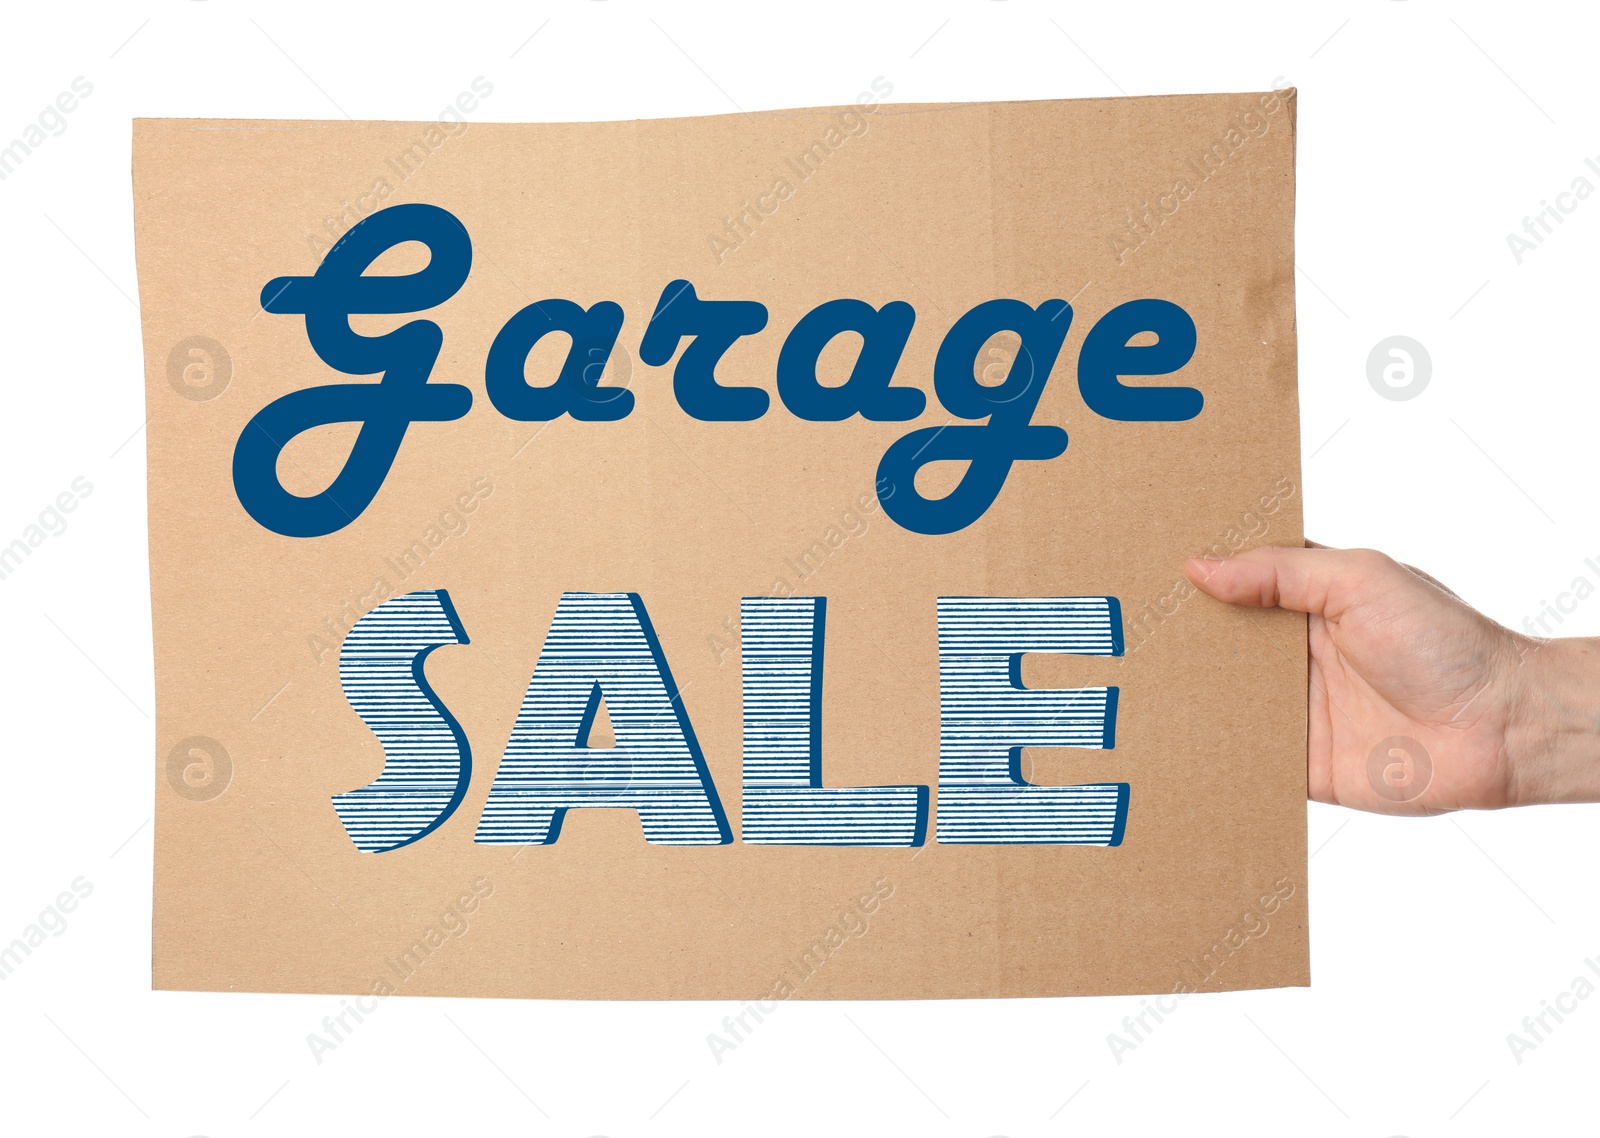 Image of Woman holding piece of cardboard with phrase GARAGE SALE on white background, closeup